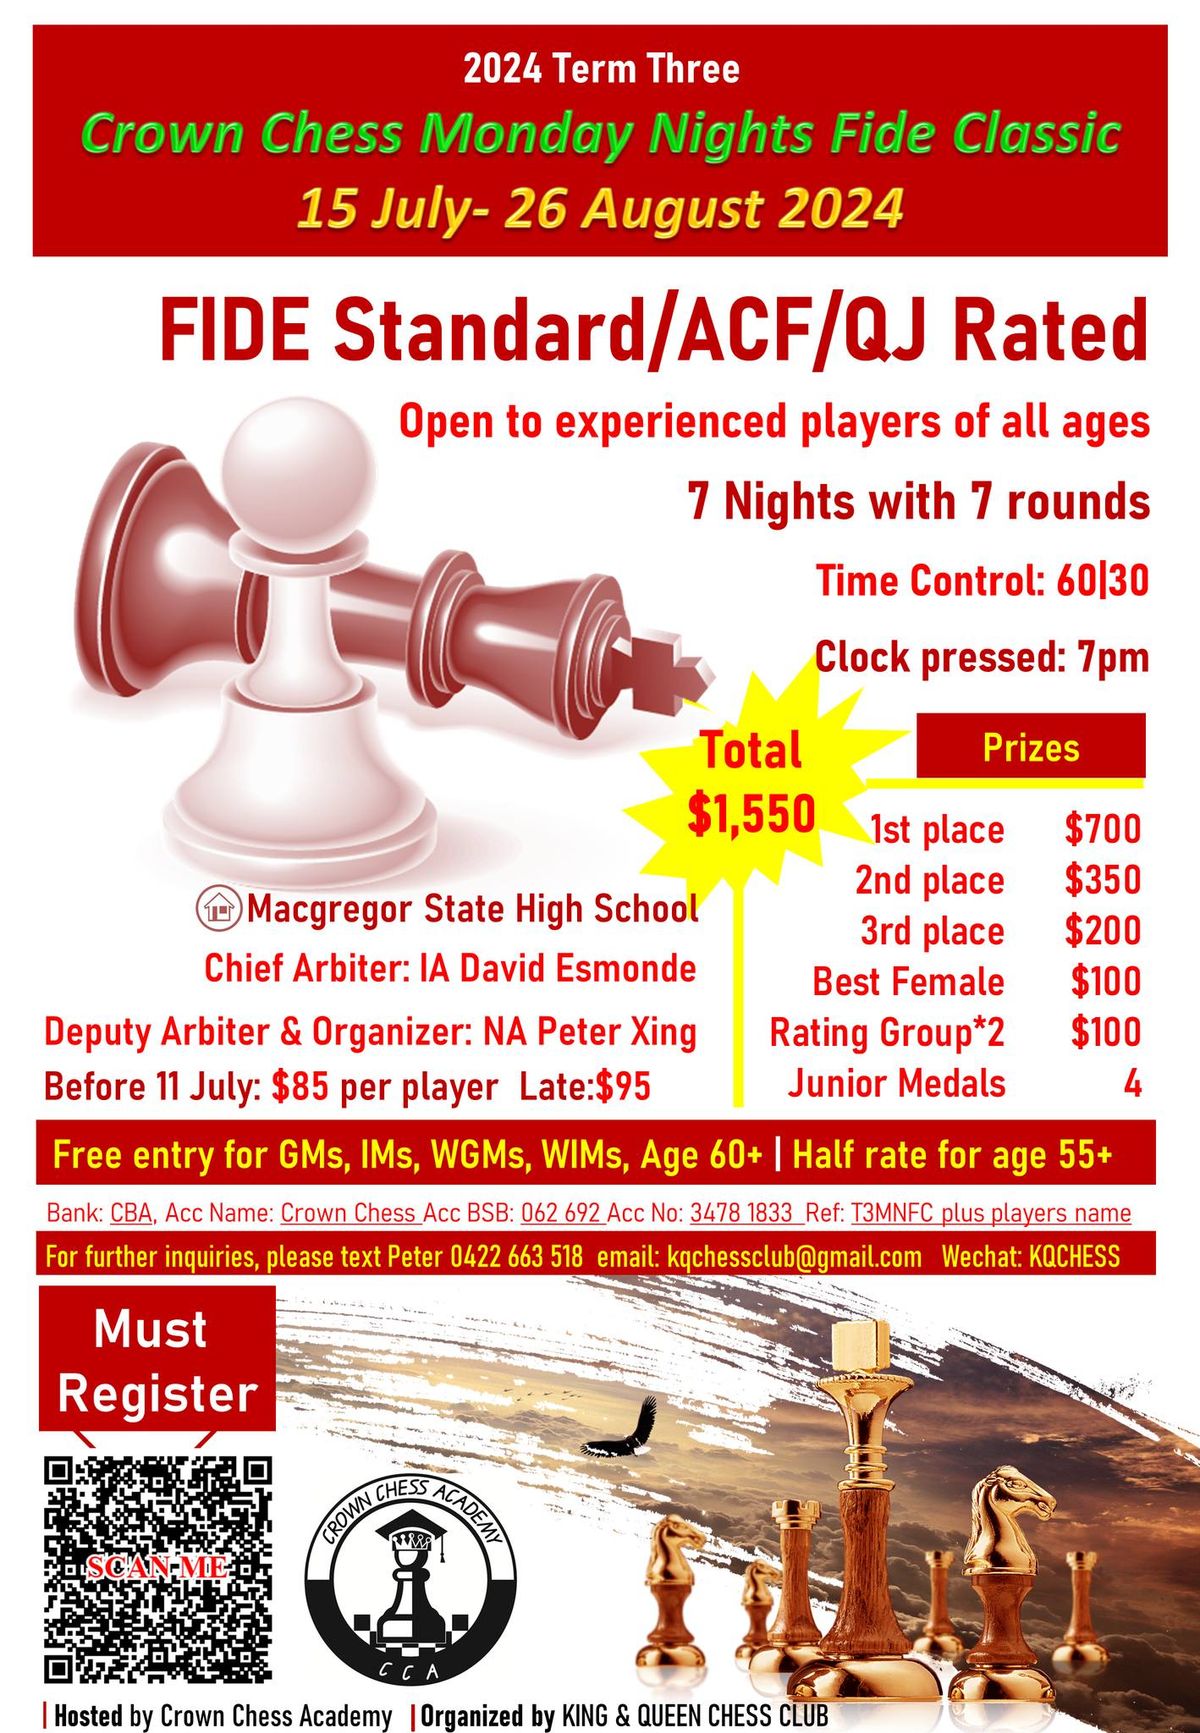 2024 T3 Crown Chess Monday Nights FIDE Classic